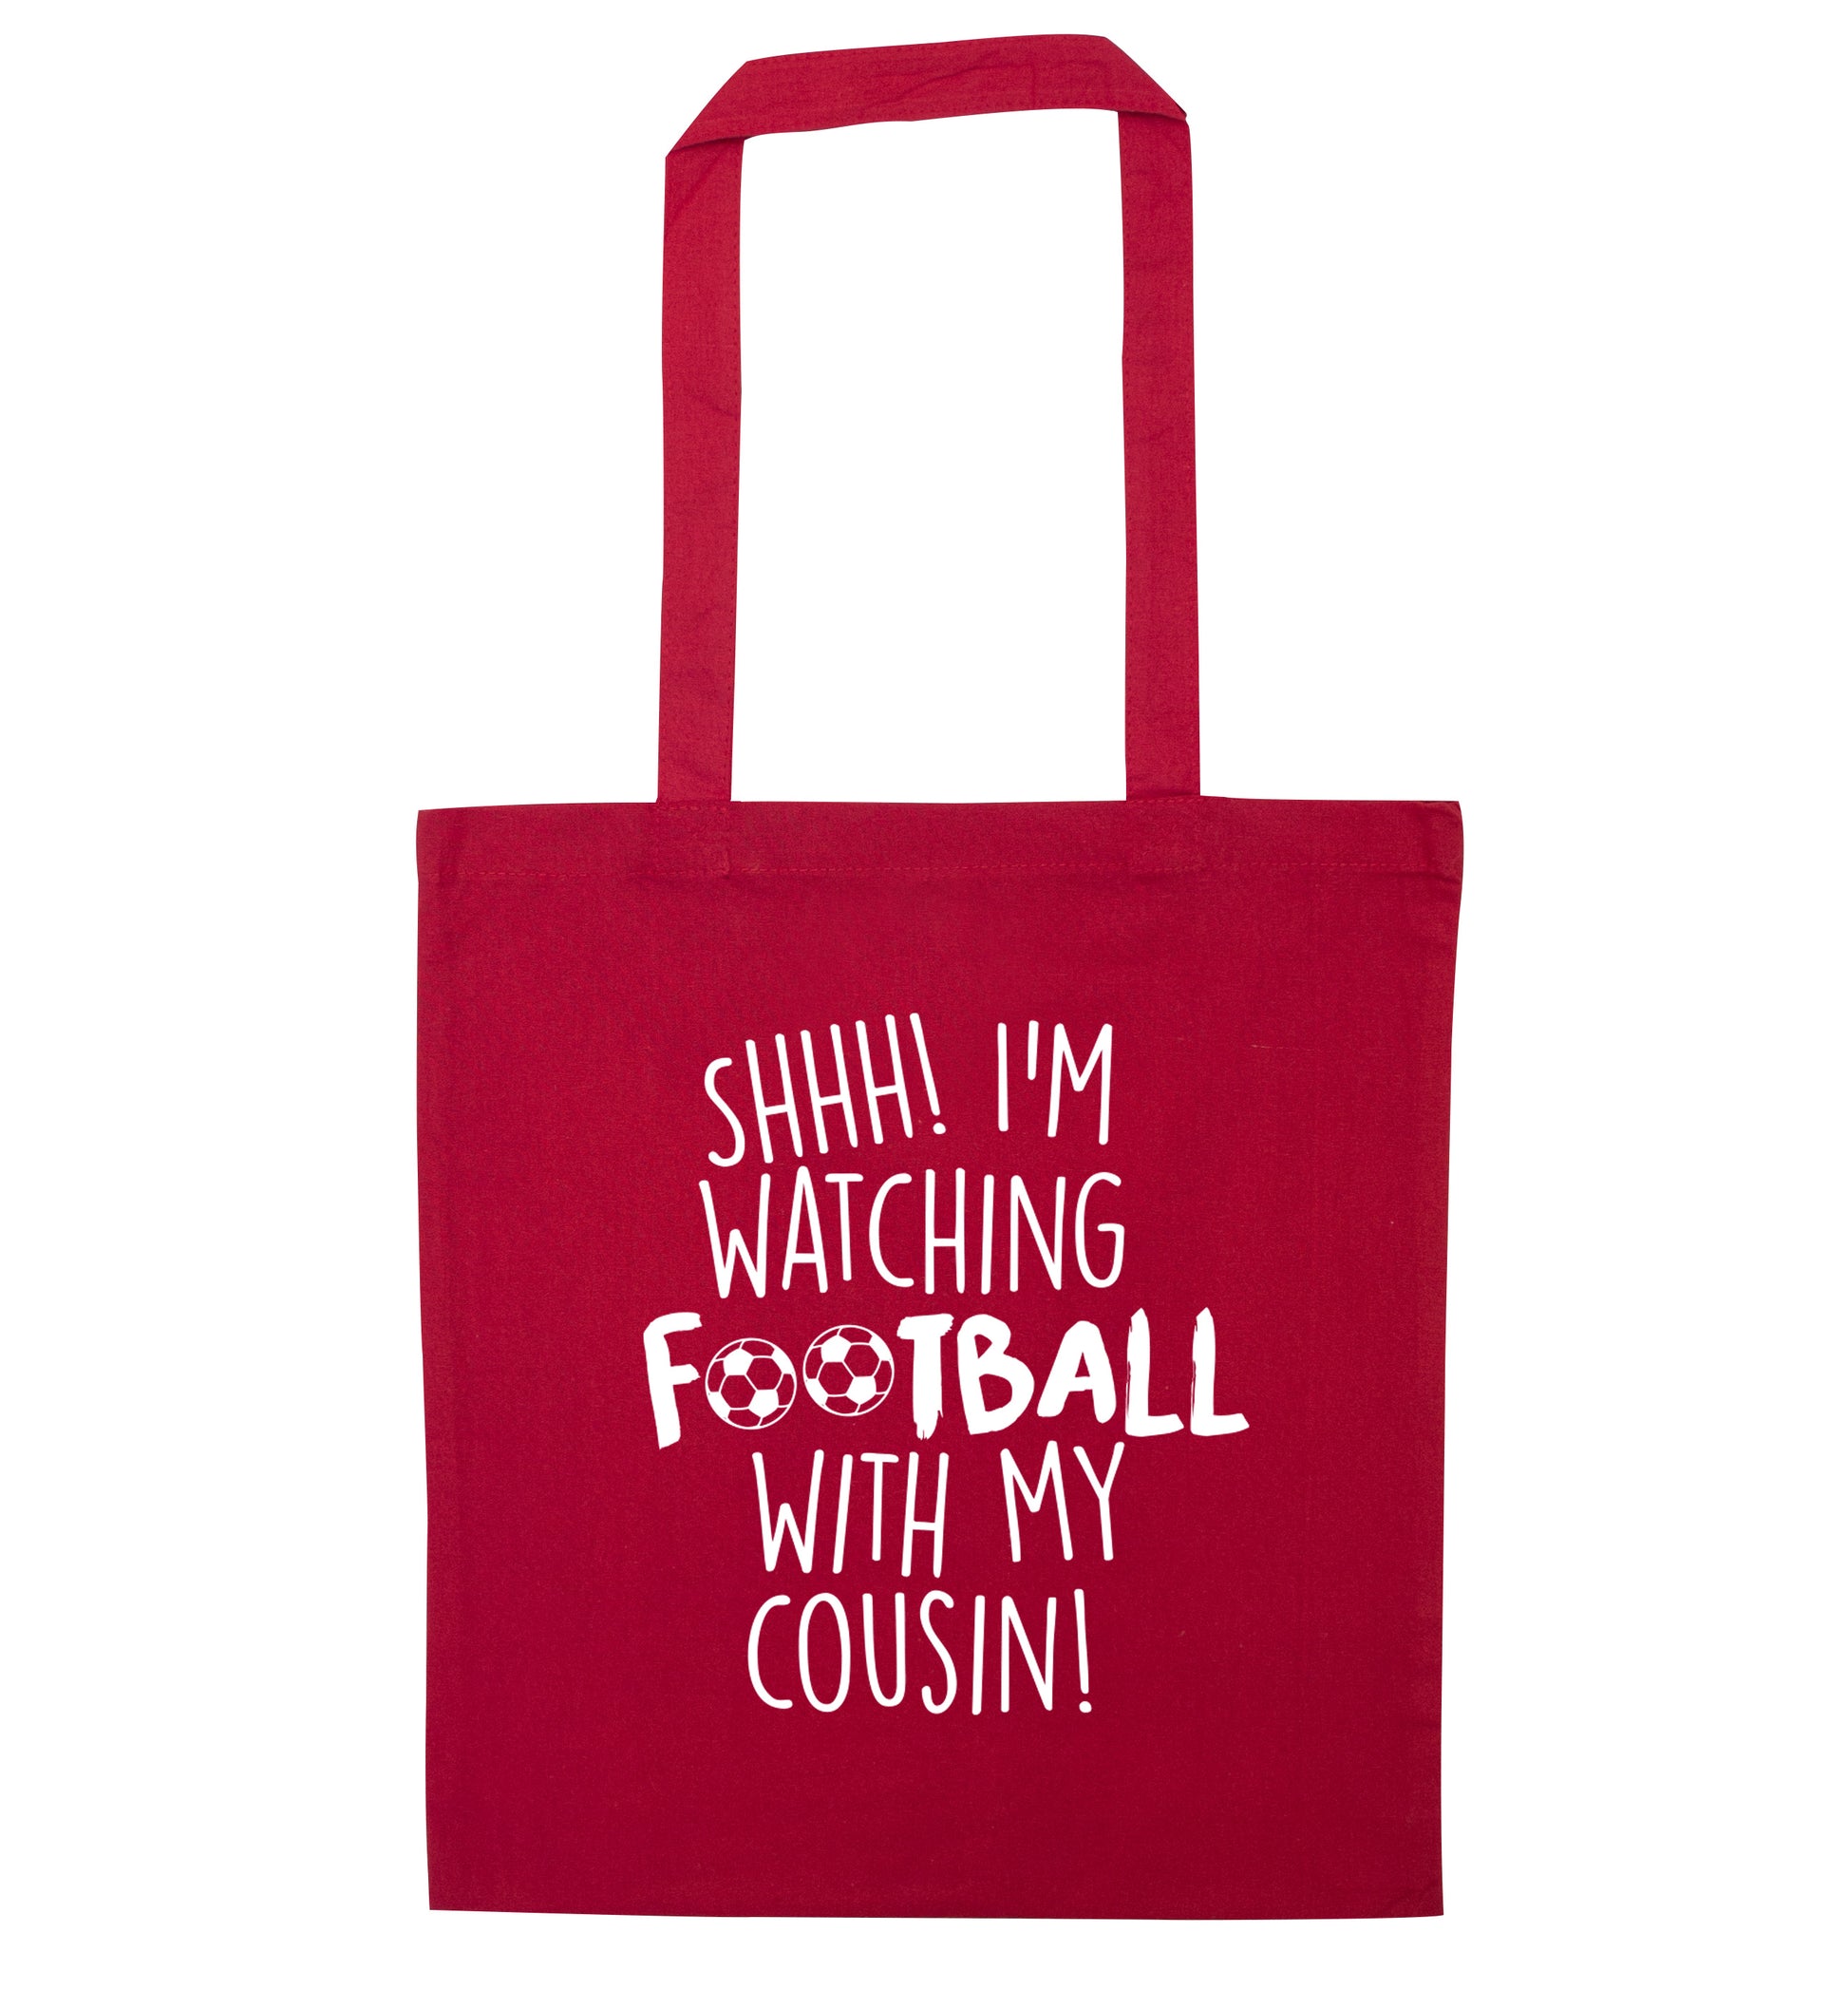 Shhh I'm watching football with my cousin red tote bag